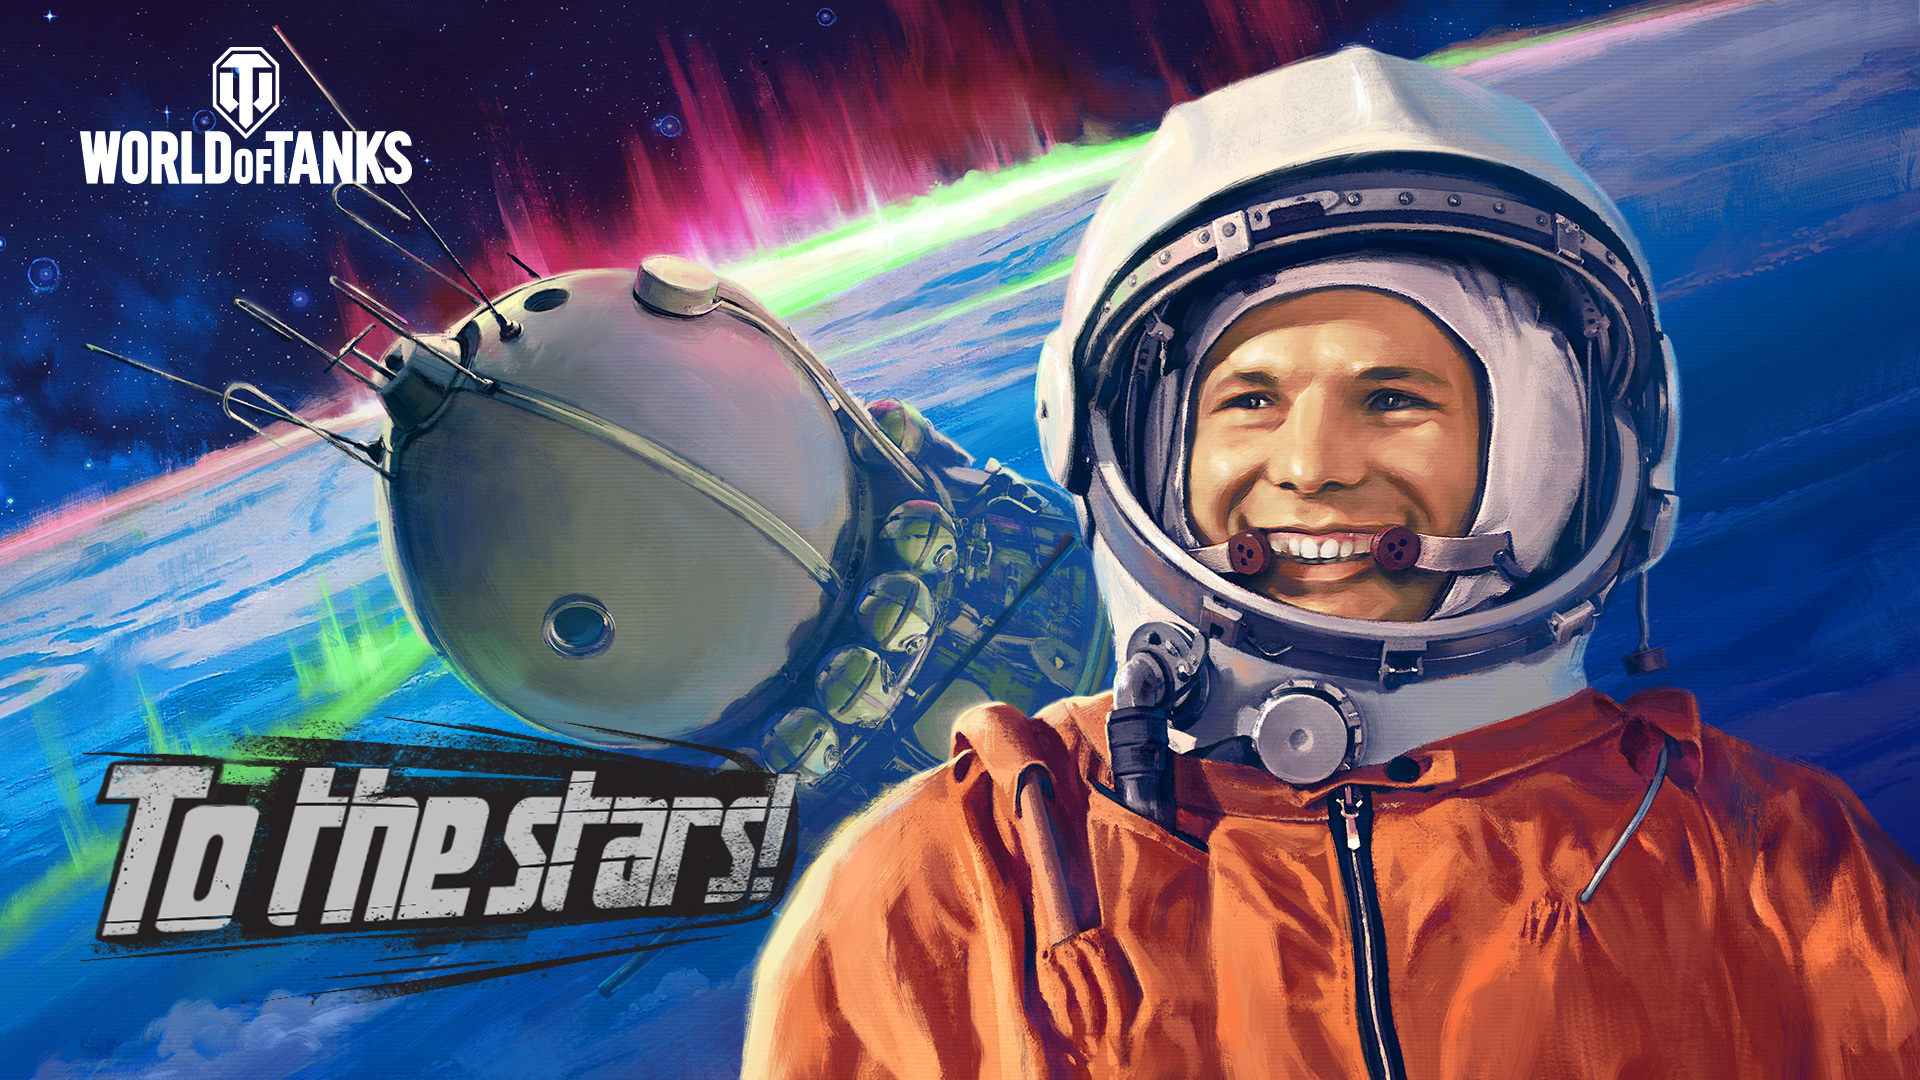 1920x1080 World of Tanks' honors the 60th anniversary of Yuri Gagarin's historic spaceflight with 'To the Stars!' event | Space